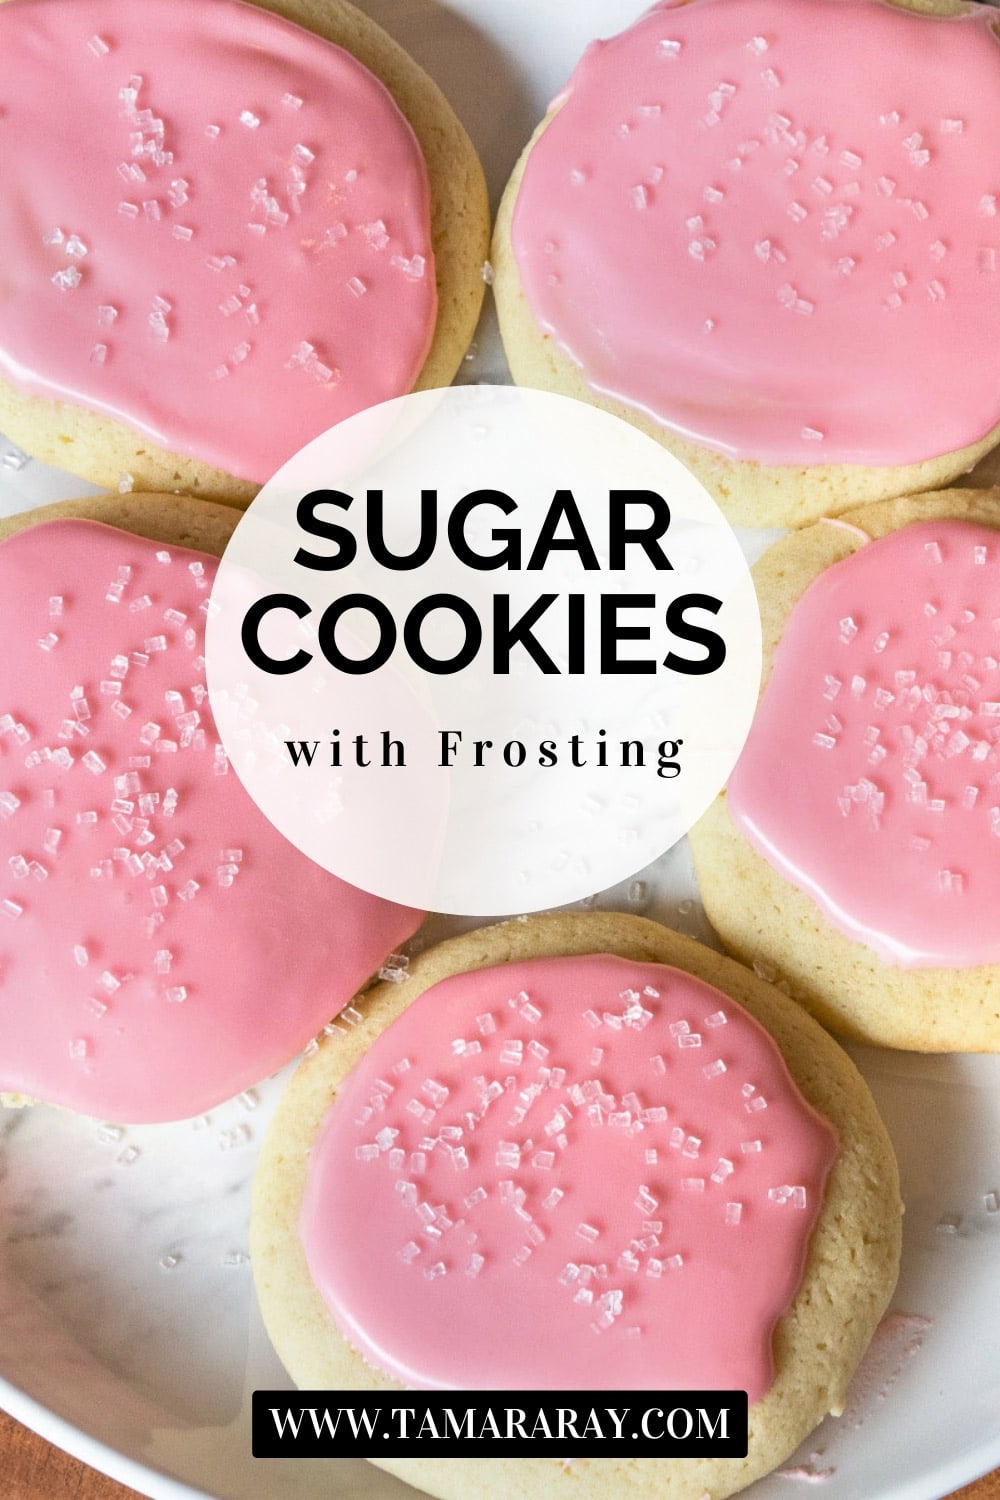 Five sugar cookies with frosting on a plate.